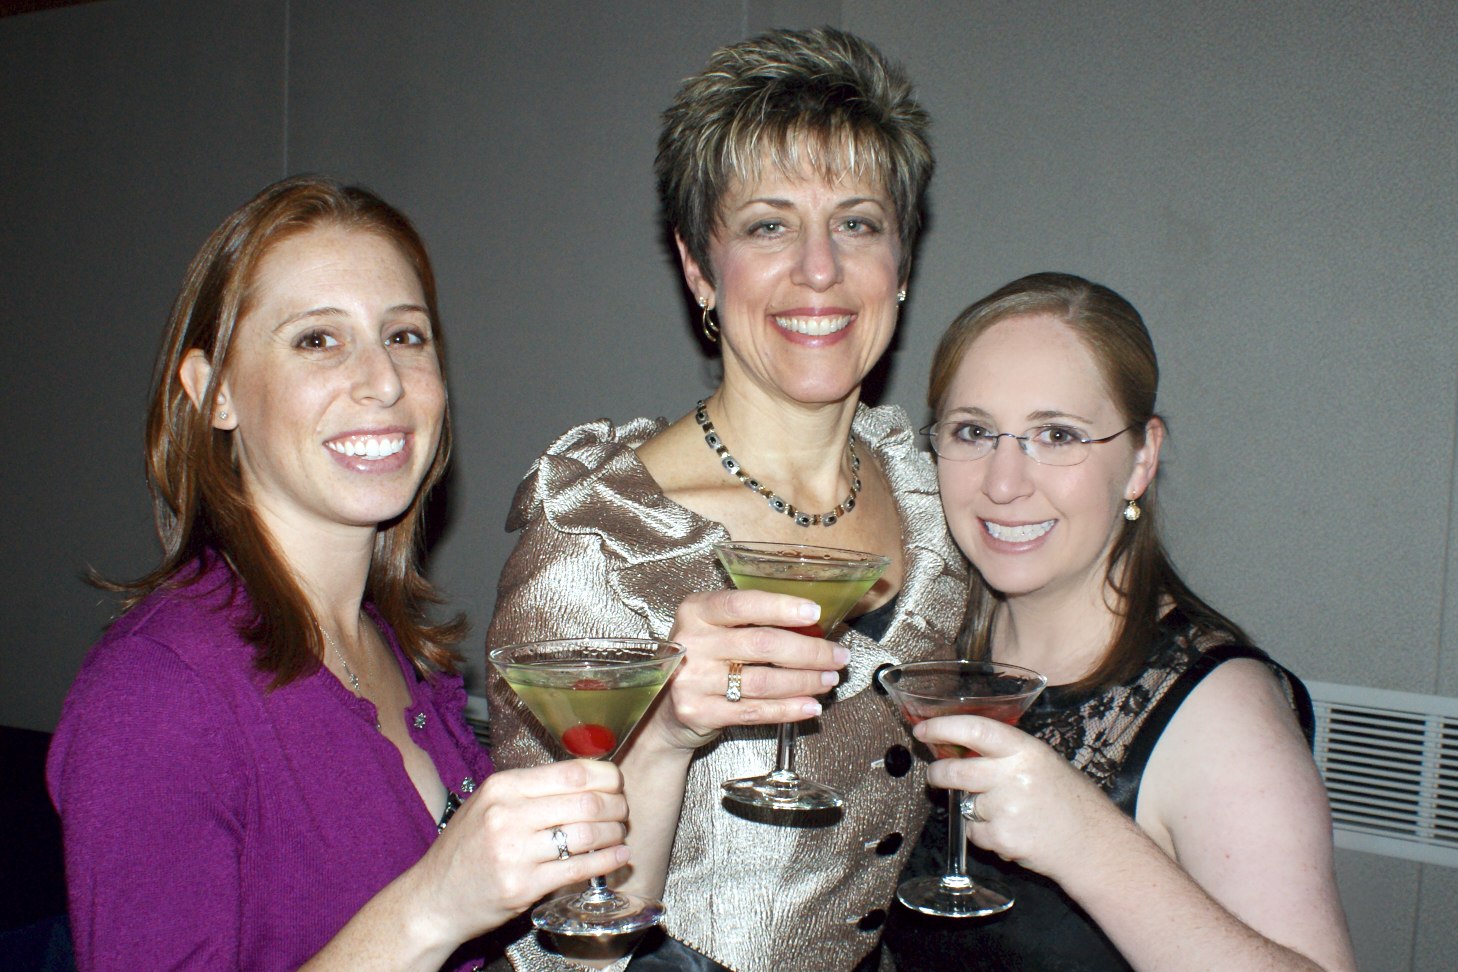 two women and one girl are smiling while holding martinis